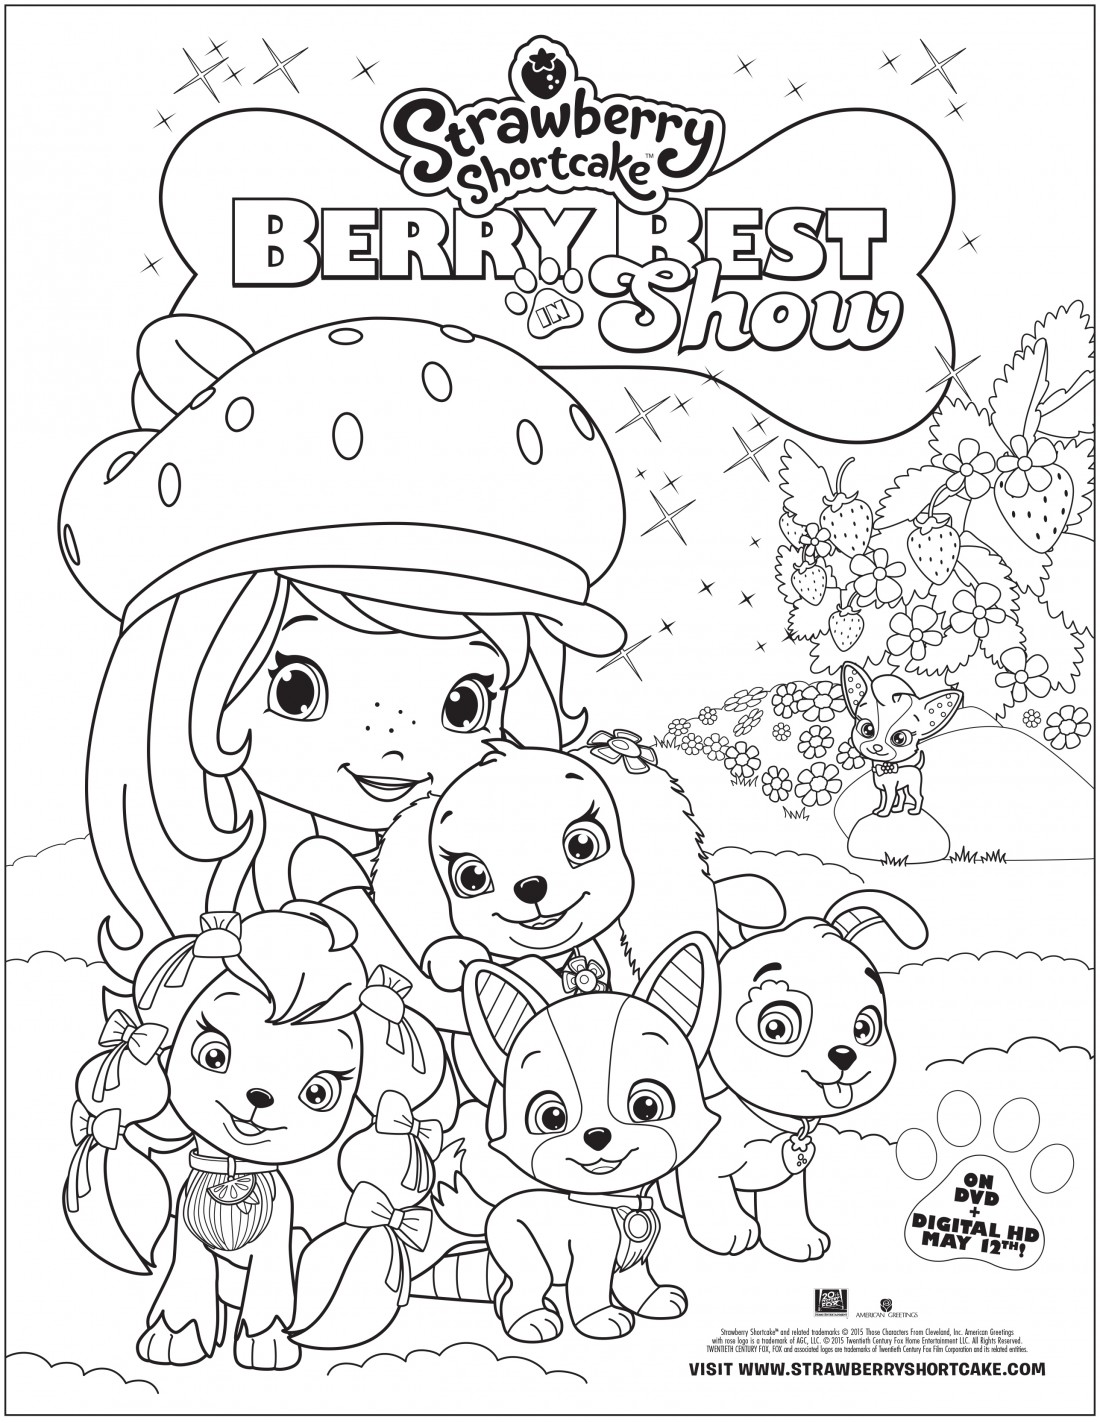 1430863280-FOX 1299 SS Berry Best in Show  Coloring PageWith Format Messaging